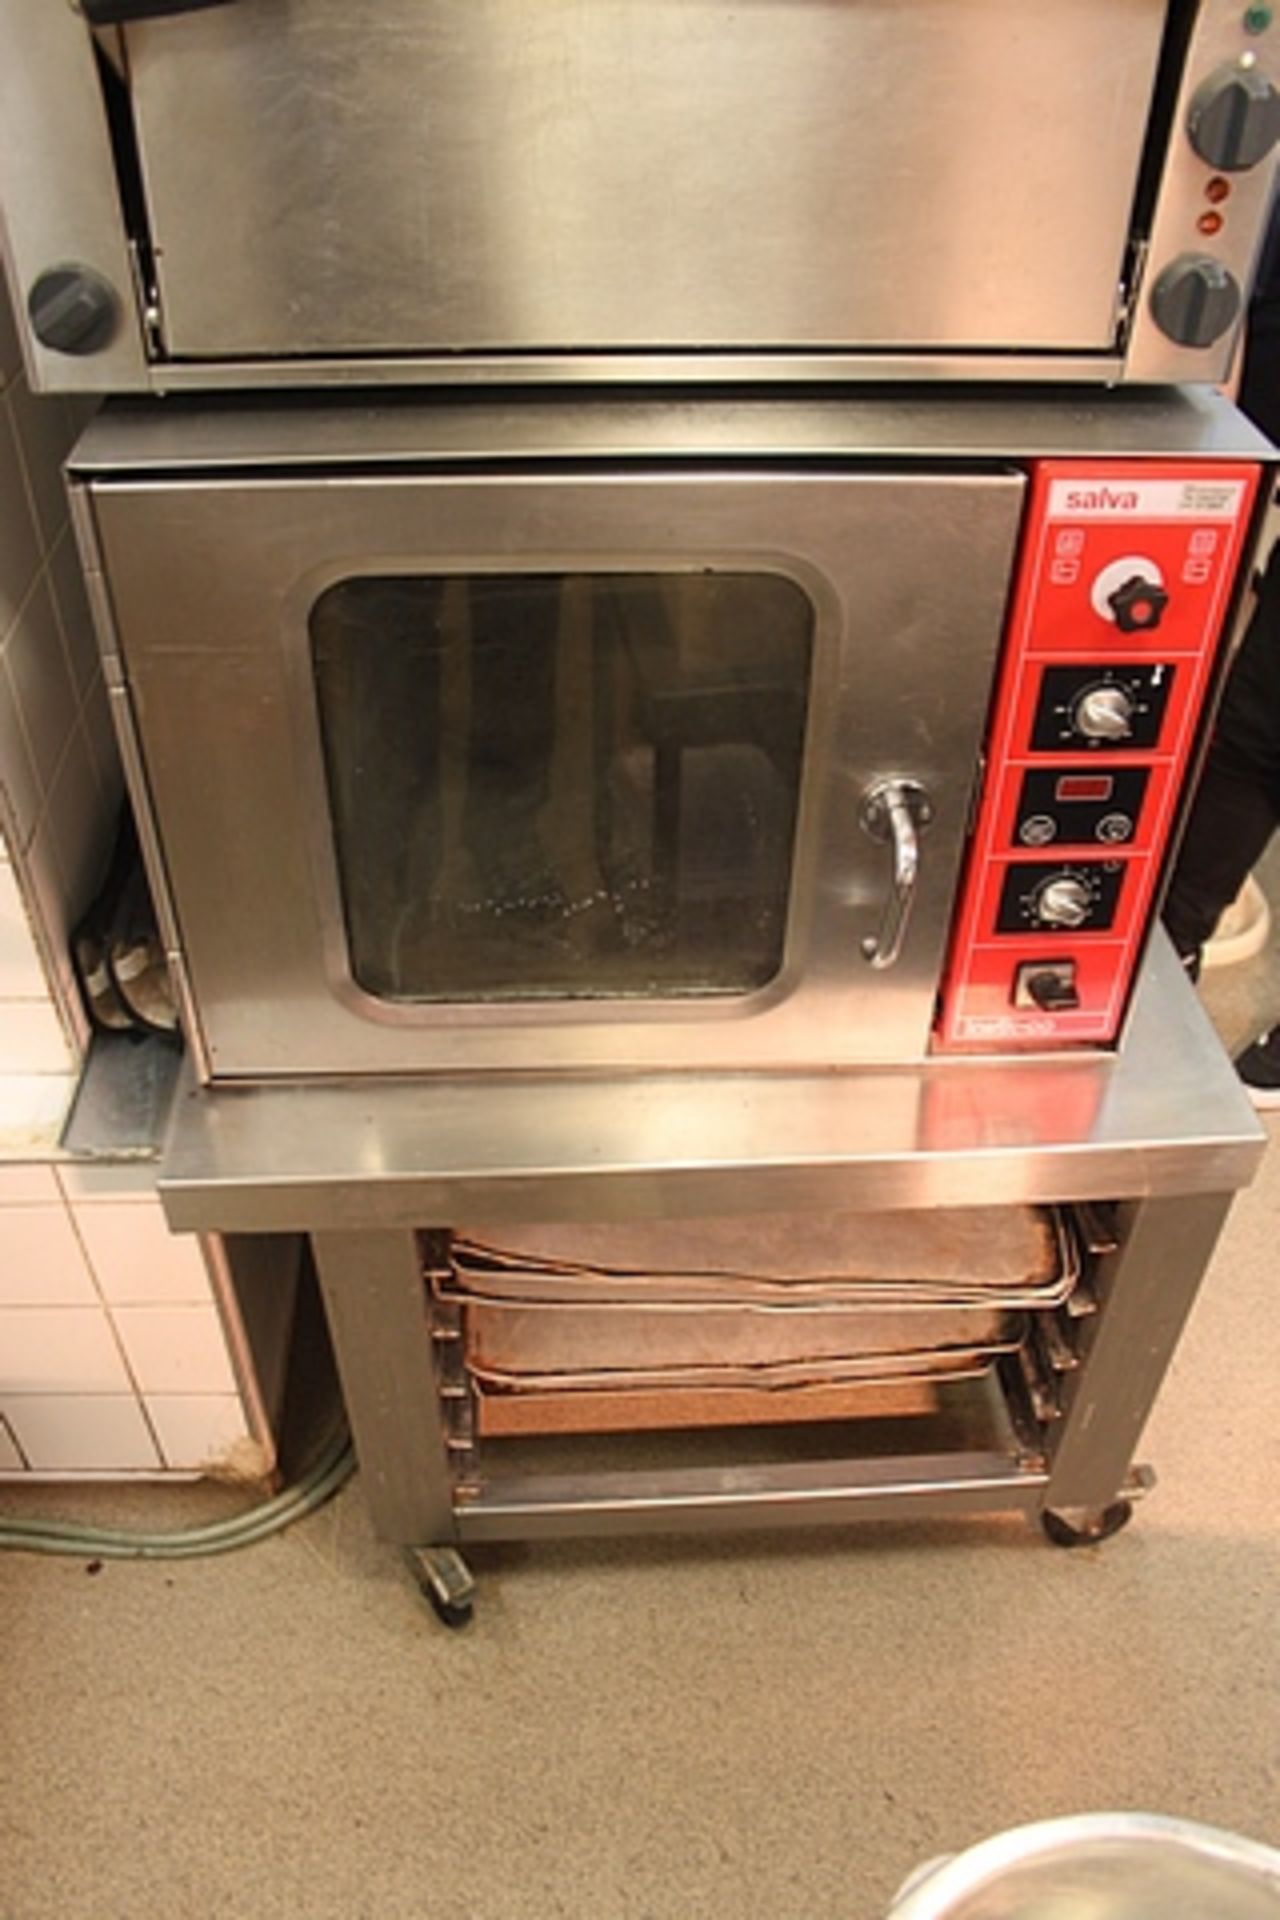 Salva electric bake off oven 4 trays GN 1/1 50 meals capacity on stainless steel stand 114849 - Image 3 of 3